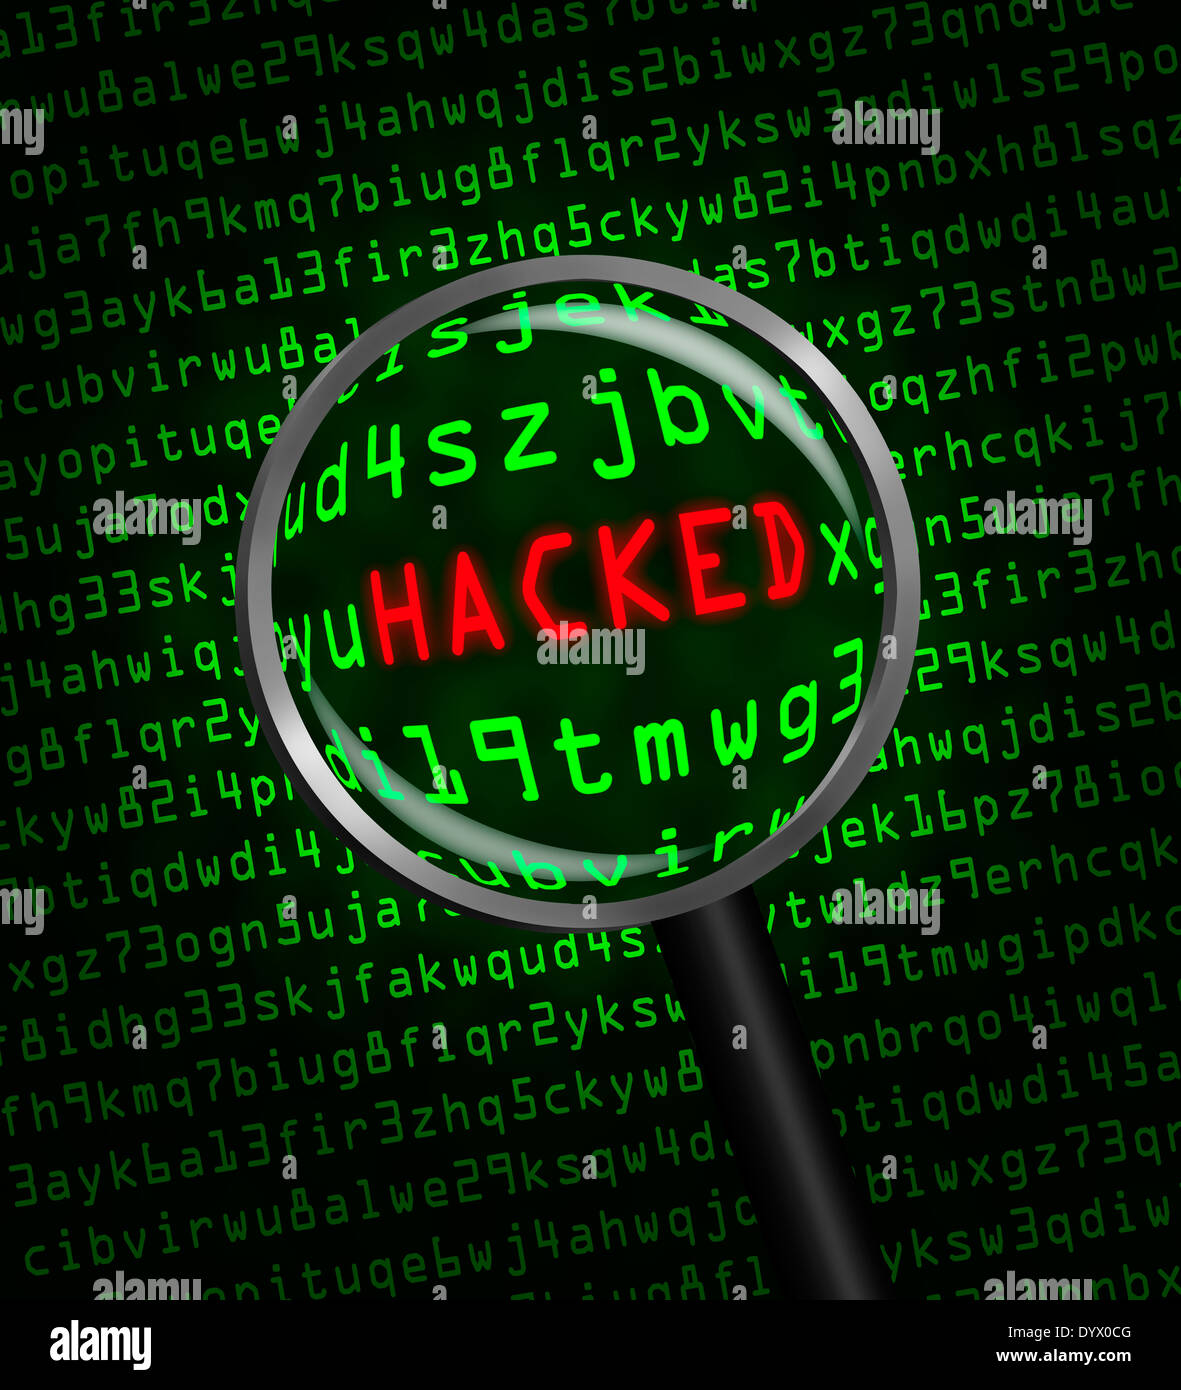 The word 'HACKED' revealed revealed in computer machine code through a magnifying glass Stock Photo